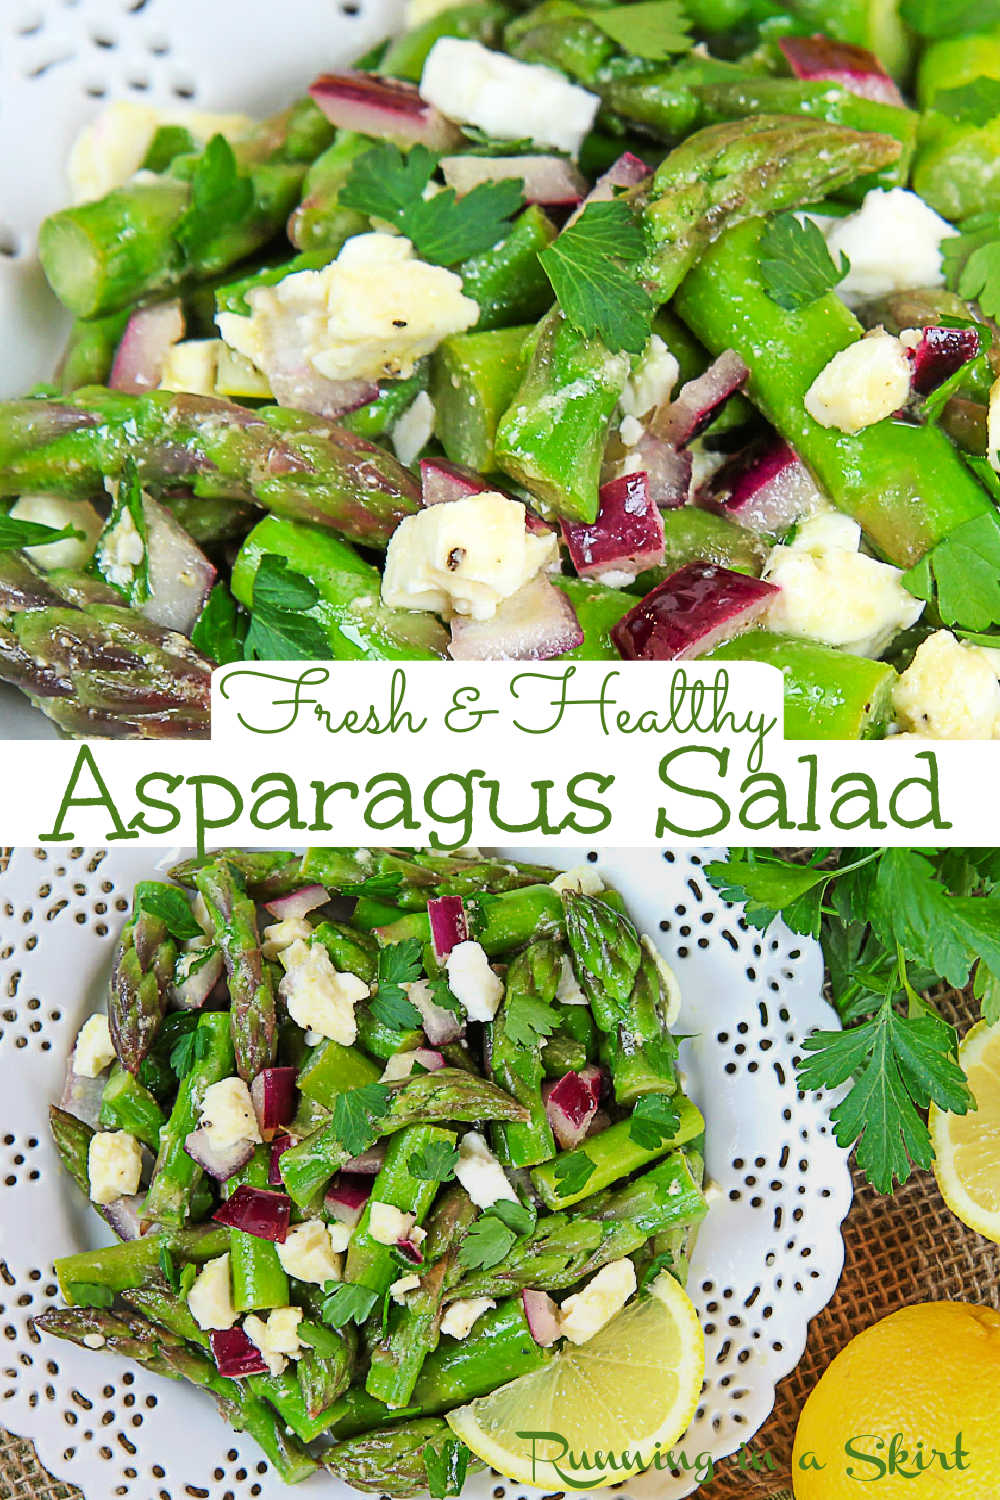 Cold Asparagus Salad recipe - fresh & healthy with feta and a homemade lemon dressing - vinaigrette. Perfect for spring, summer, cookouts or even the Easter brunch table. You'll love this colorful way to enjoy your veggies! Serve chilled or warm. Sub nuts for the cheese to make Vegan. Vegetarian, Gluten Free, Low Carb, Low Calorie / Running in a Skirt #vegetarian #salad #easter #asparagus #lowcarb #salad #healthyrecipes via @juliewunder